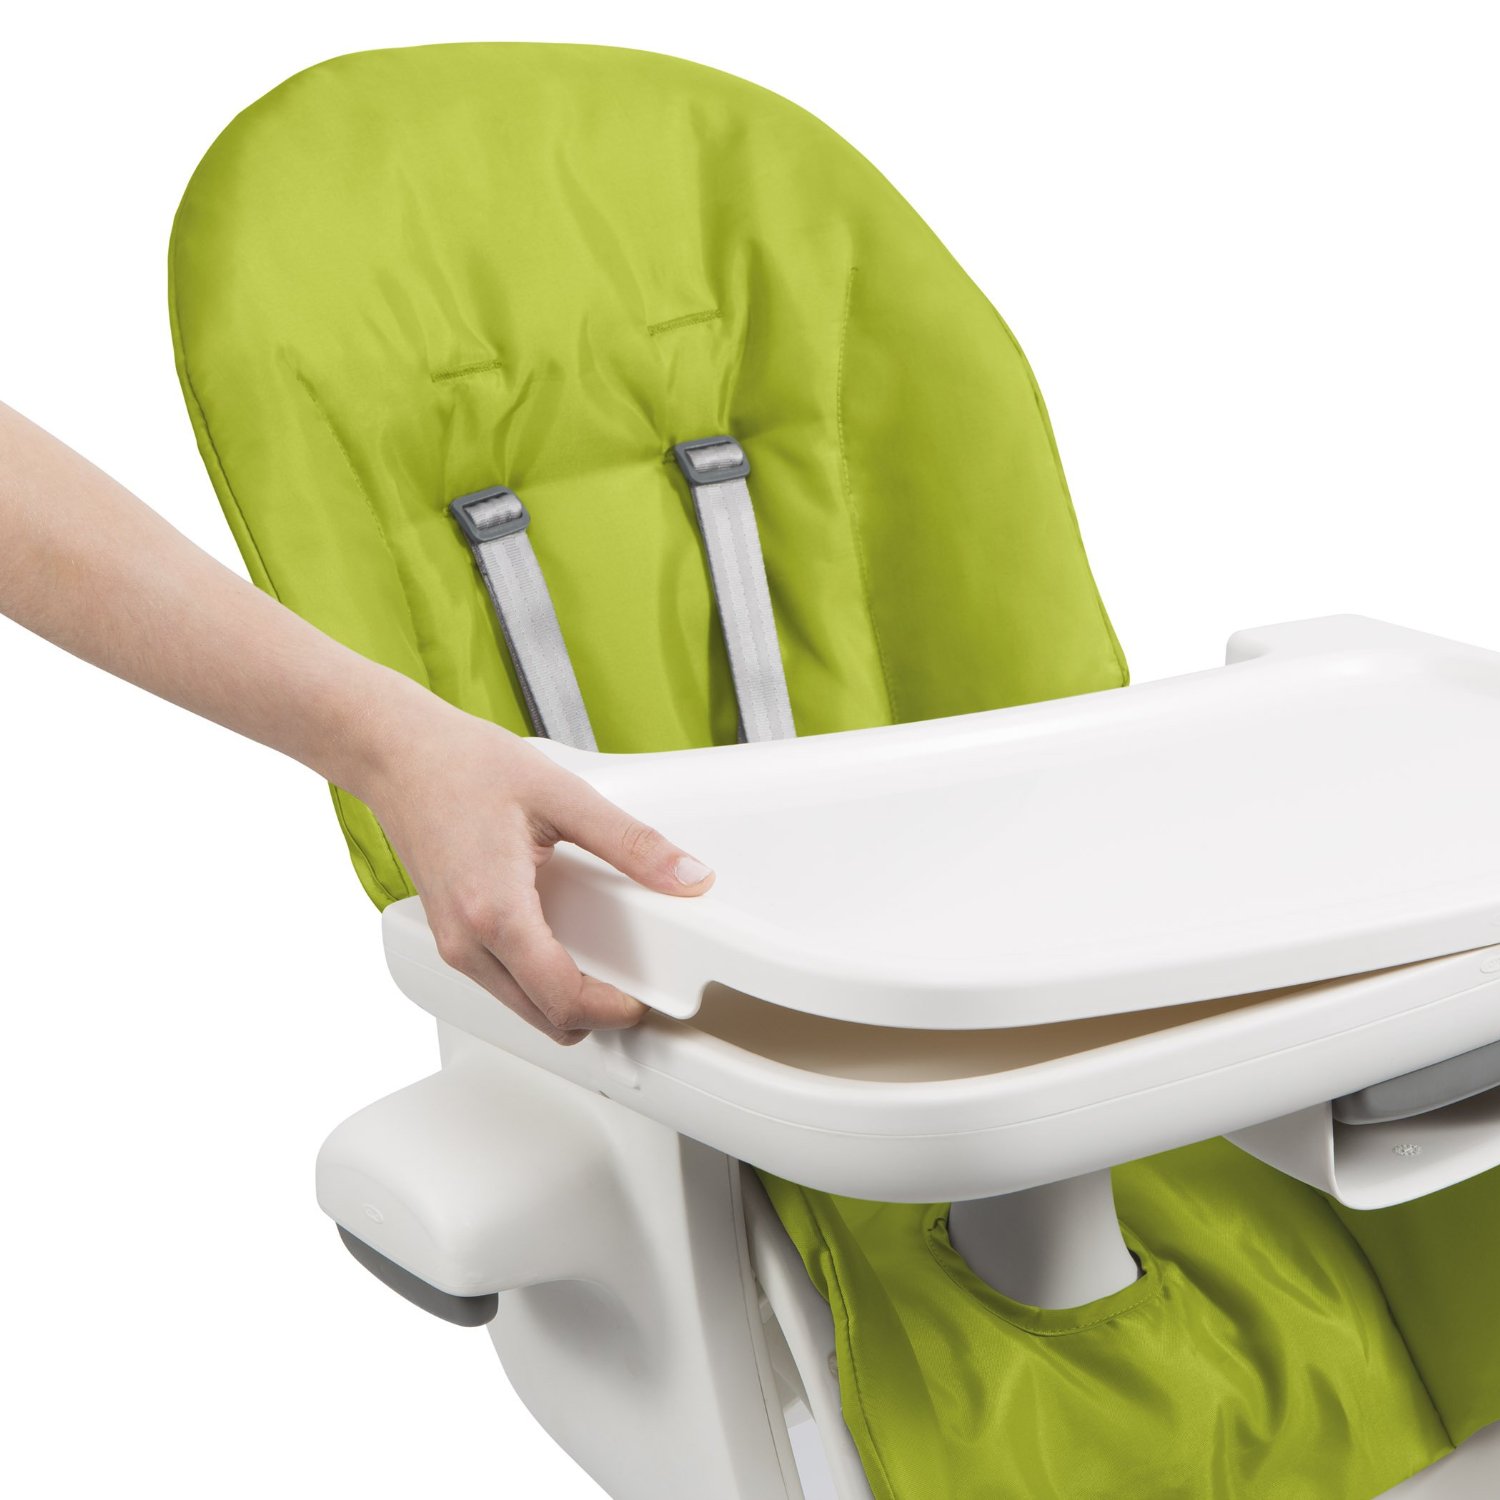 Review: OXO Seedling High Chair